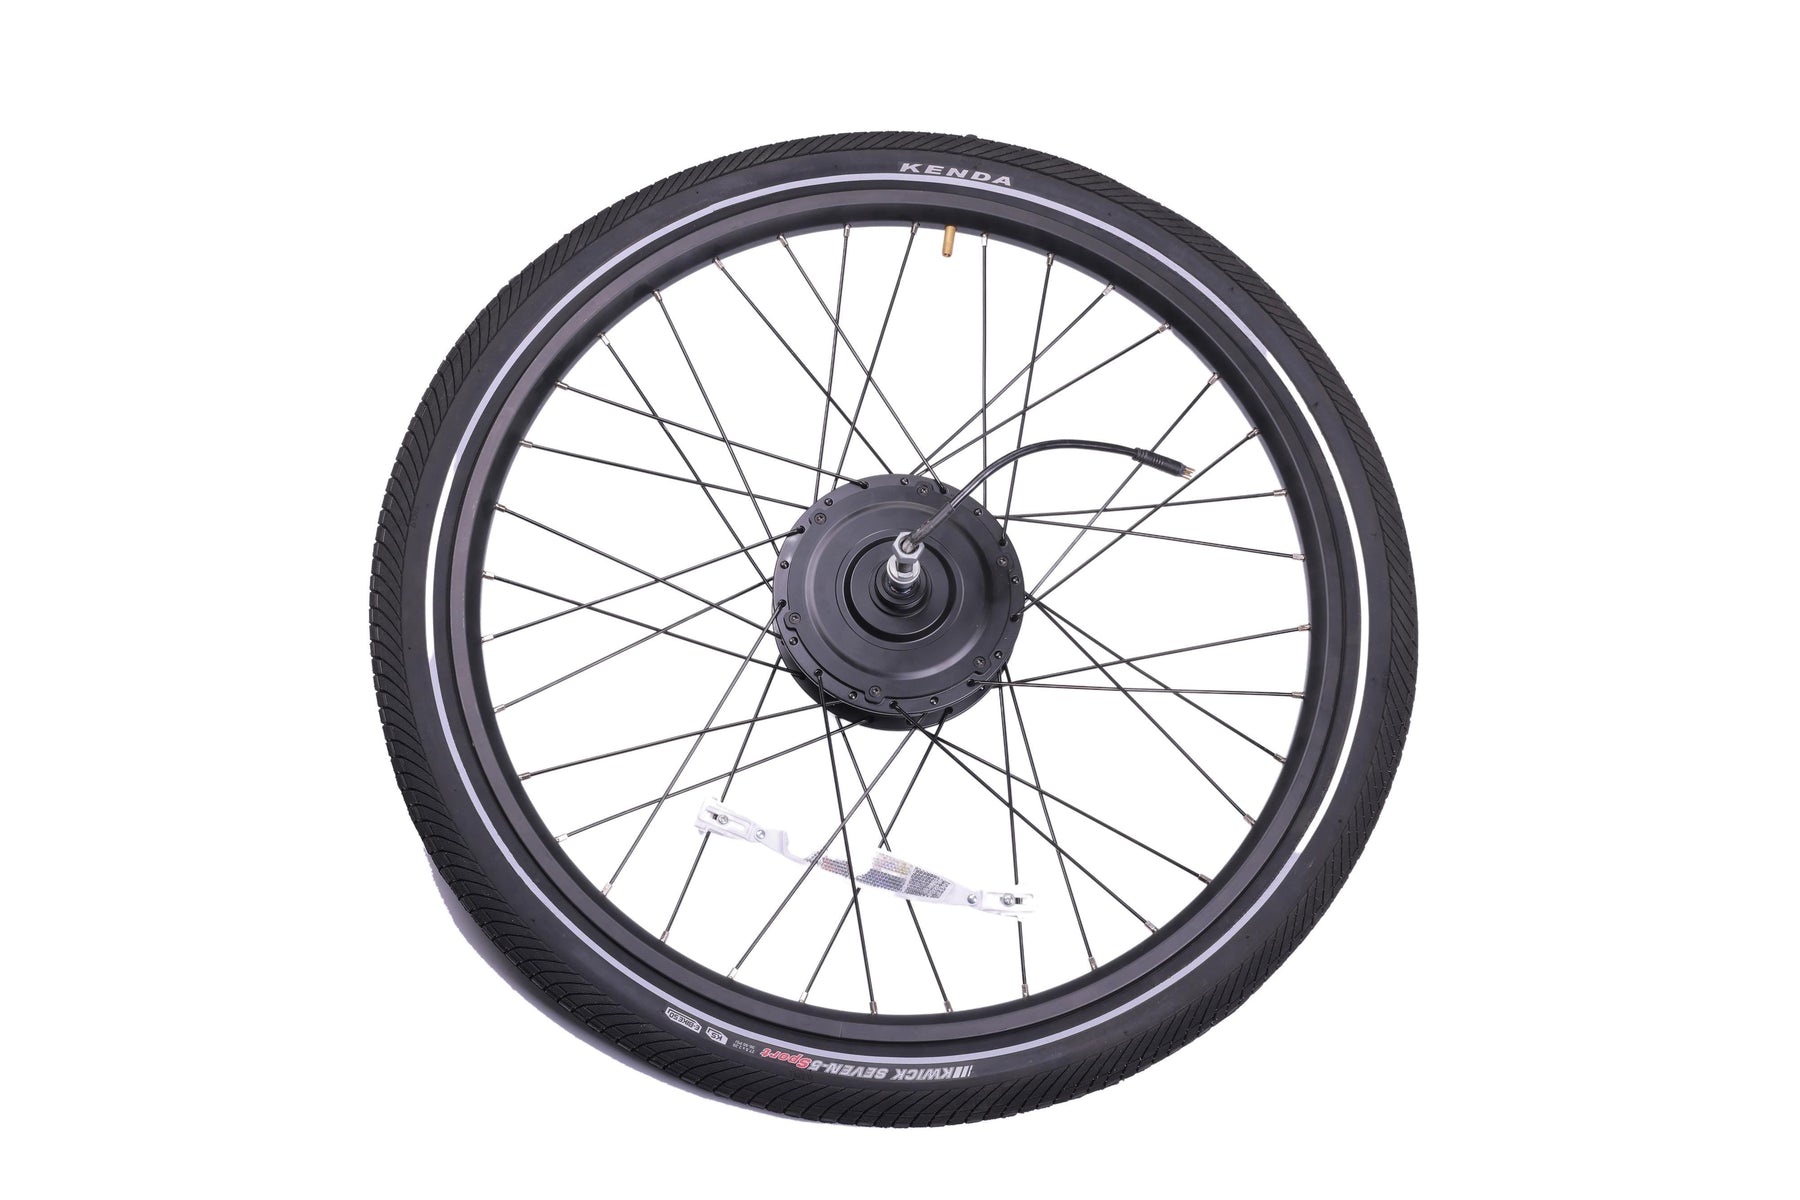 Wheel Assembly Replacement for Denago City 1 eBikes